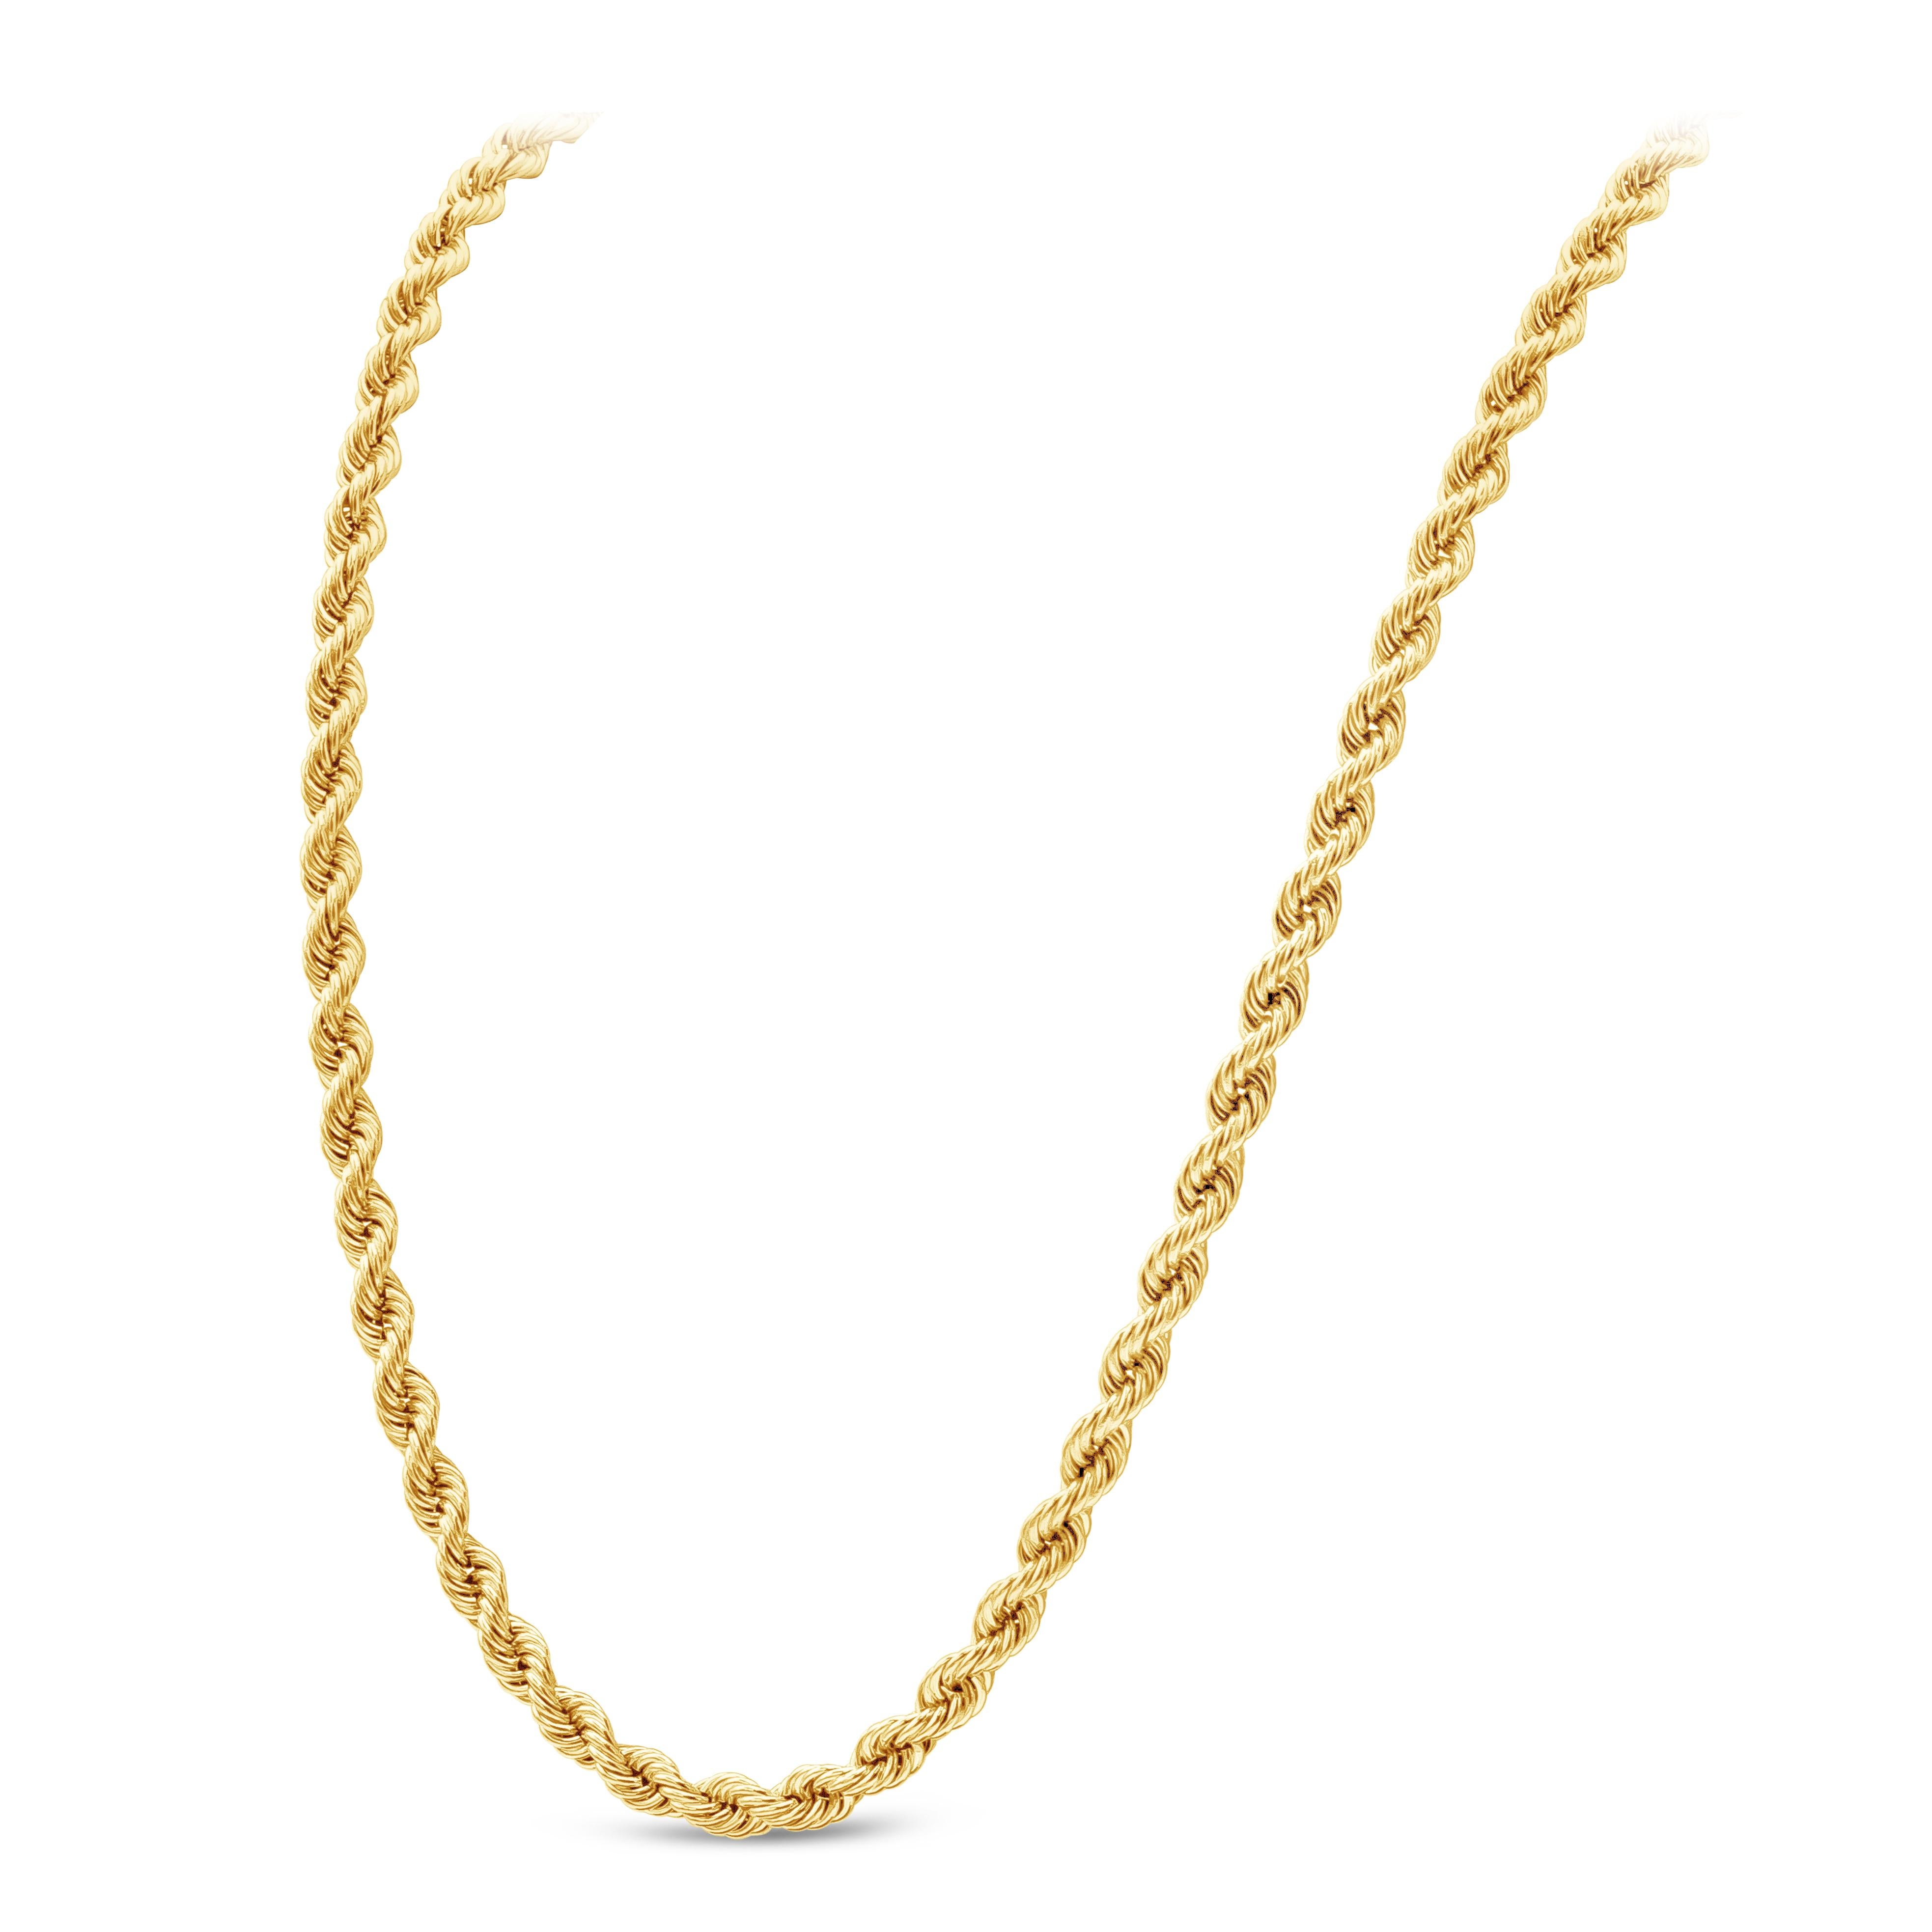 A classic plain rope chain made with 14K yellow gold. Designed with a twisted style, this necklace is 47 grams in weight and 30 inches in length.
